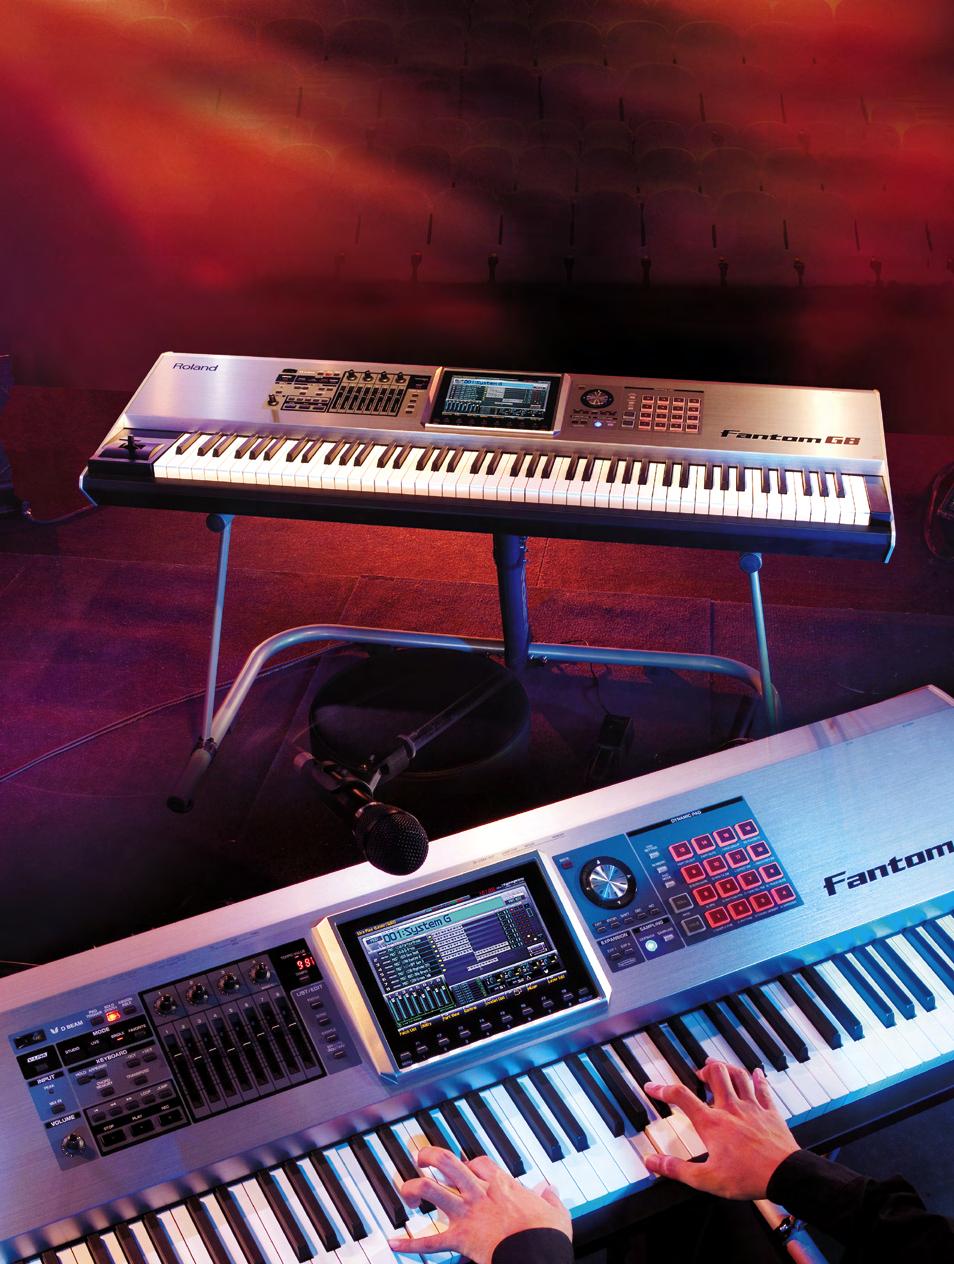 The high quality of the sound sets give you a radically refreshed stage sound, while the new-generation keyboard action and SuperNATURAL expansion sets gives you the musical palette for newfound